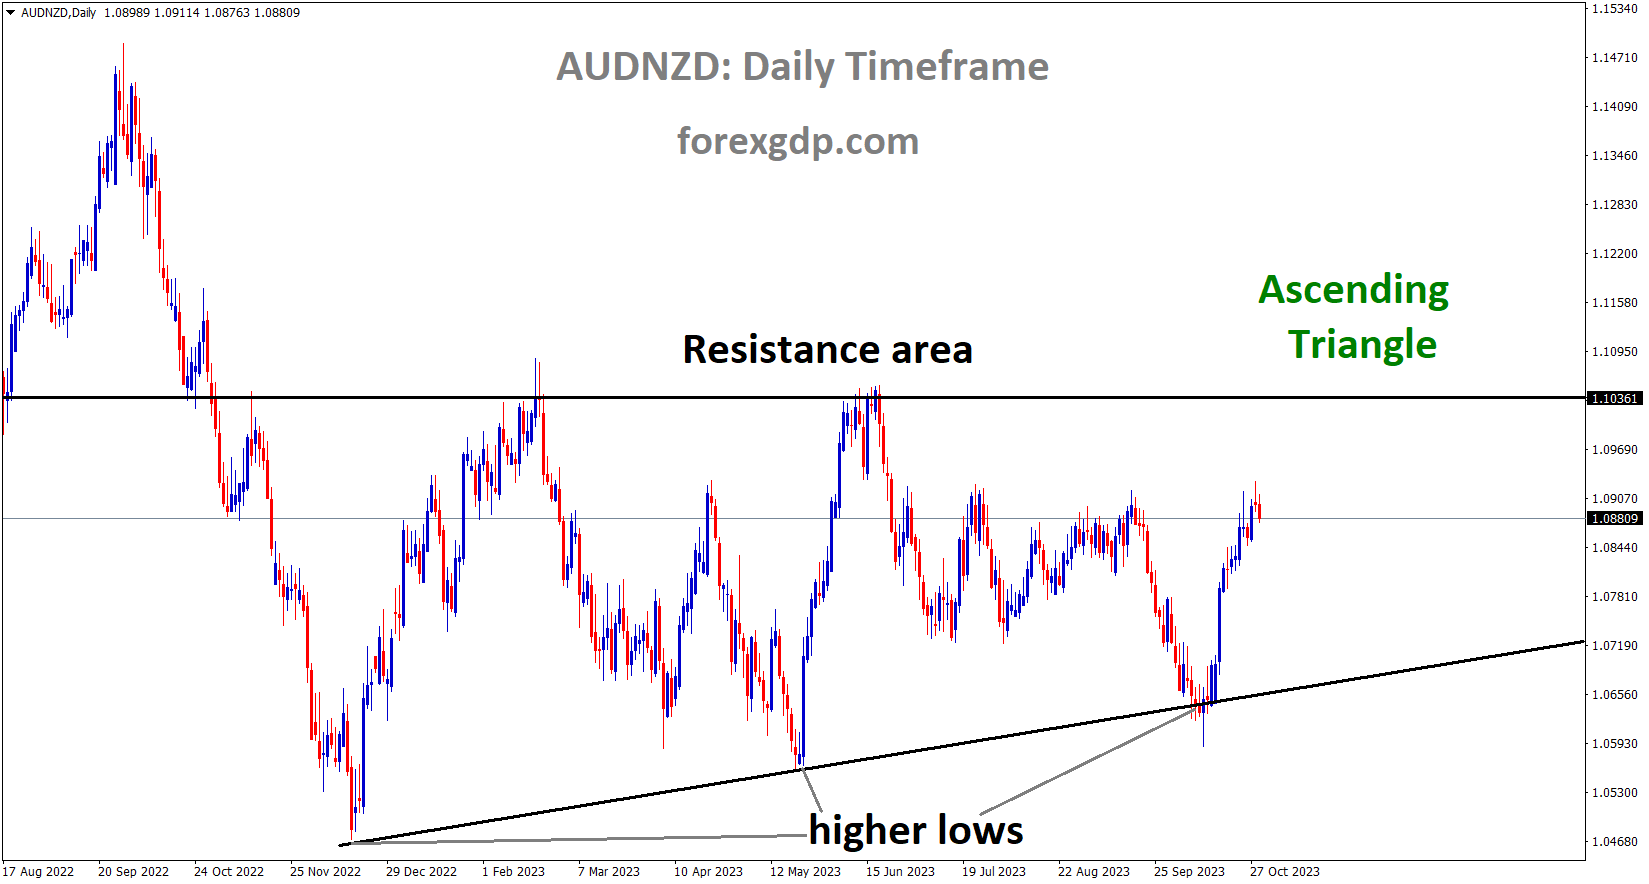 AUDNZD is moving in an Ascending triangle pattern and the market has rebounded from the higher low area of the pattern